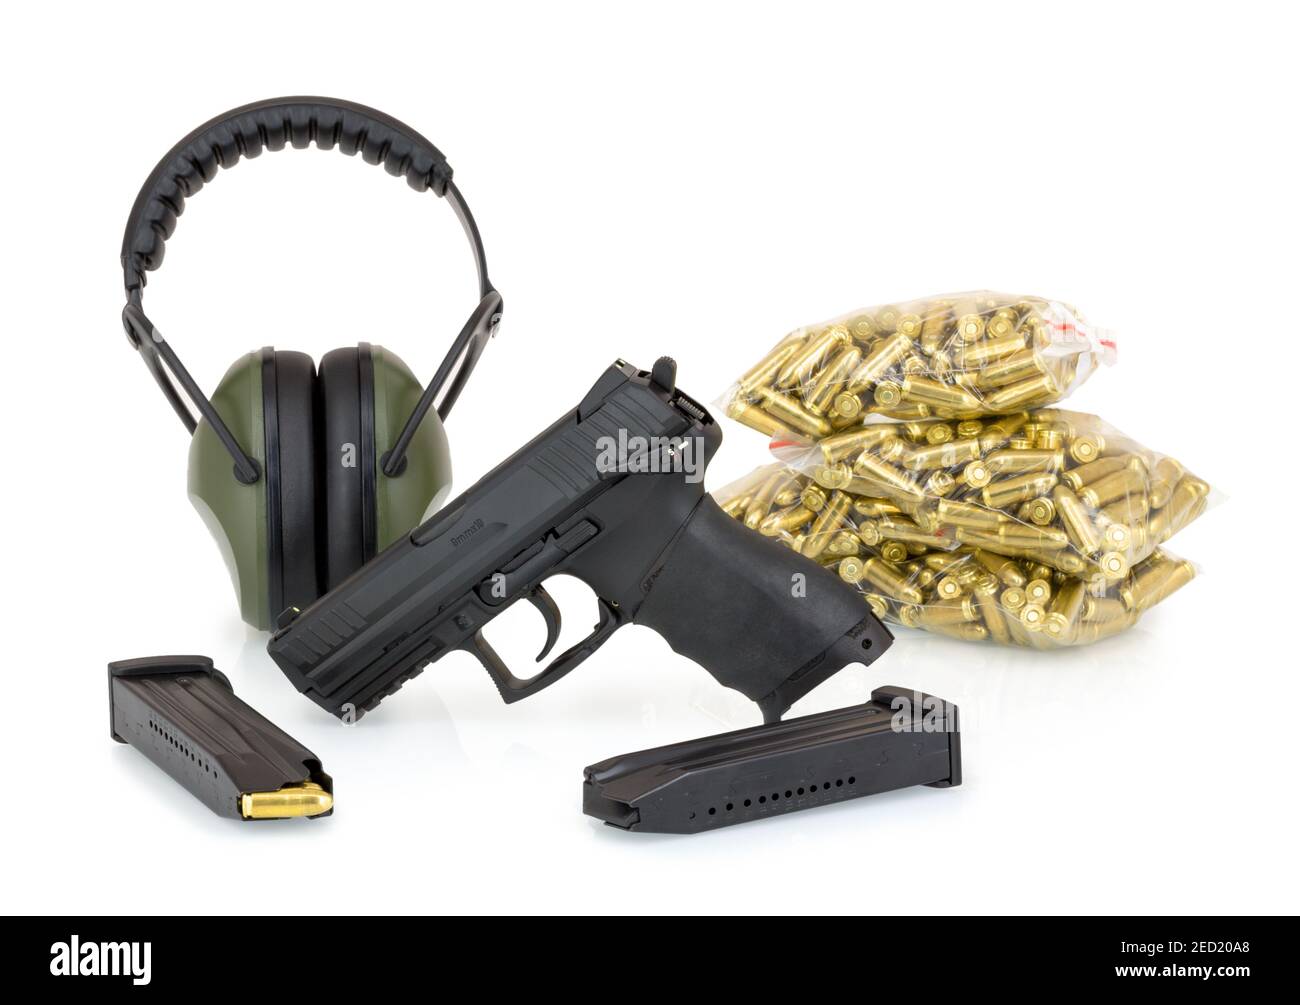 Pistol, ear protection and ammunition. Isolated on white background with shadow reflection. Gun, earmuffs, magazines and bullets 9mm stacked in bags o Stock Photo